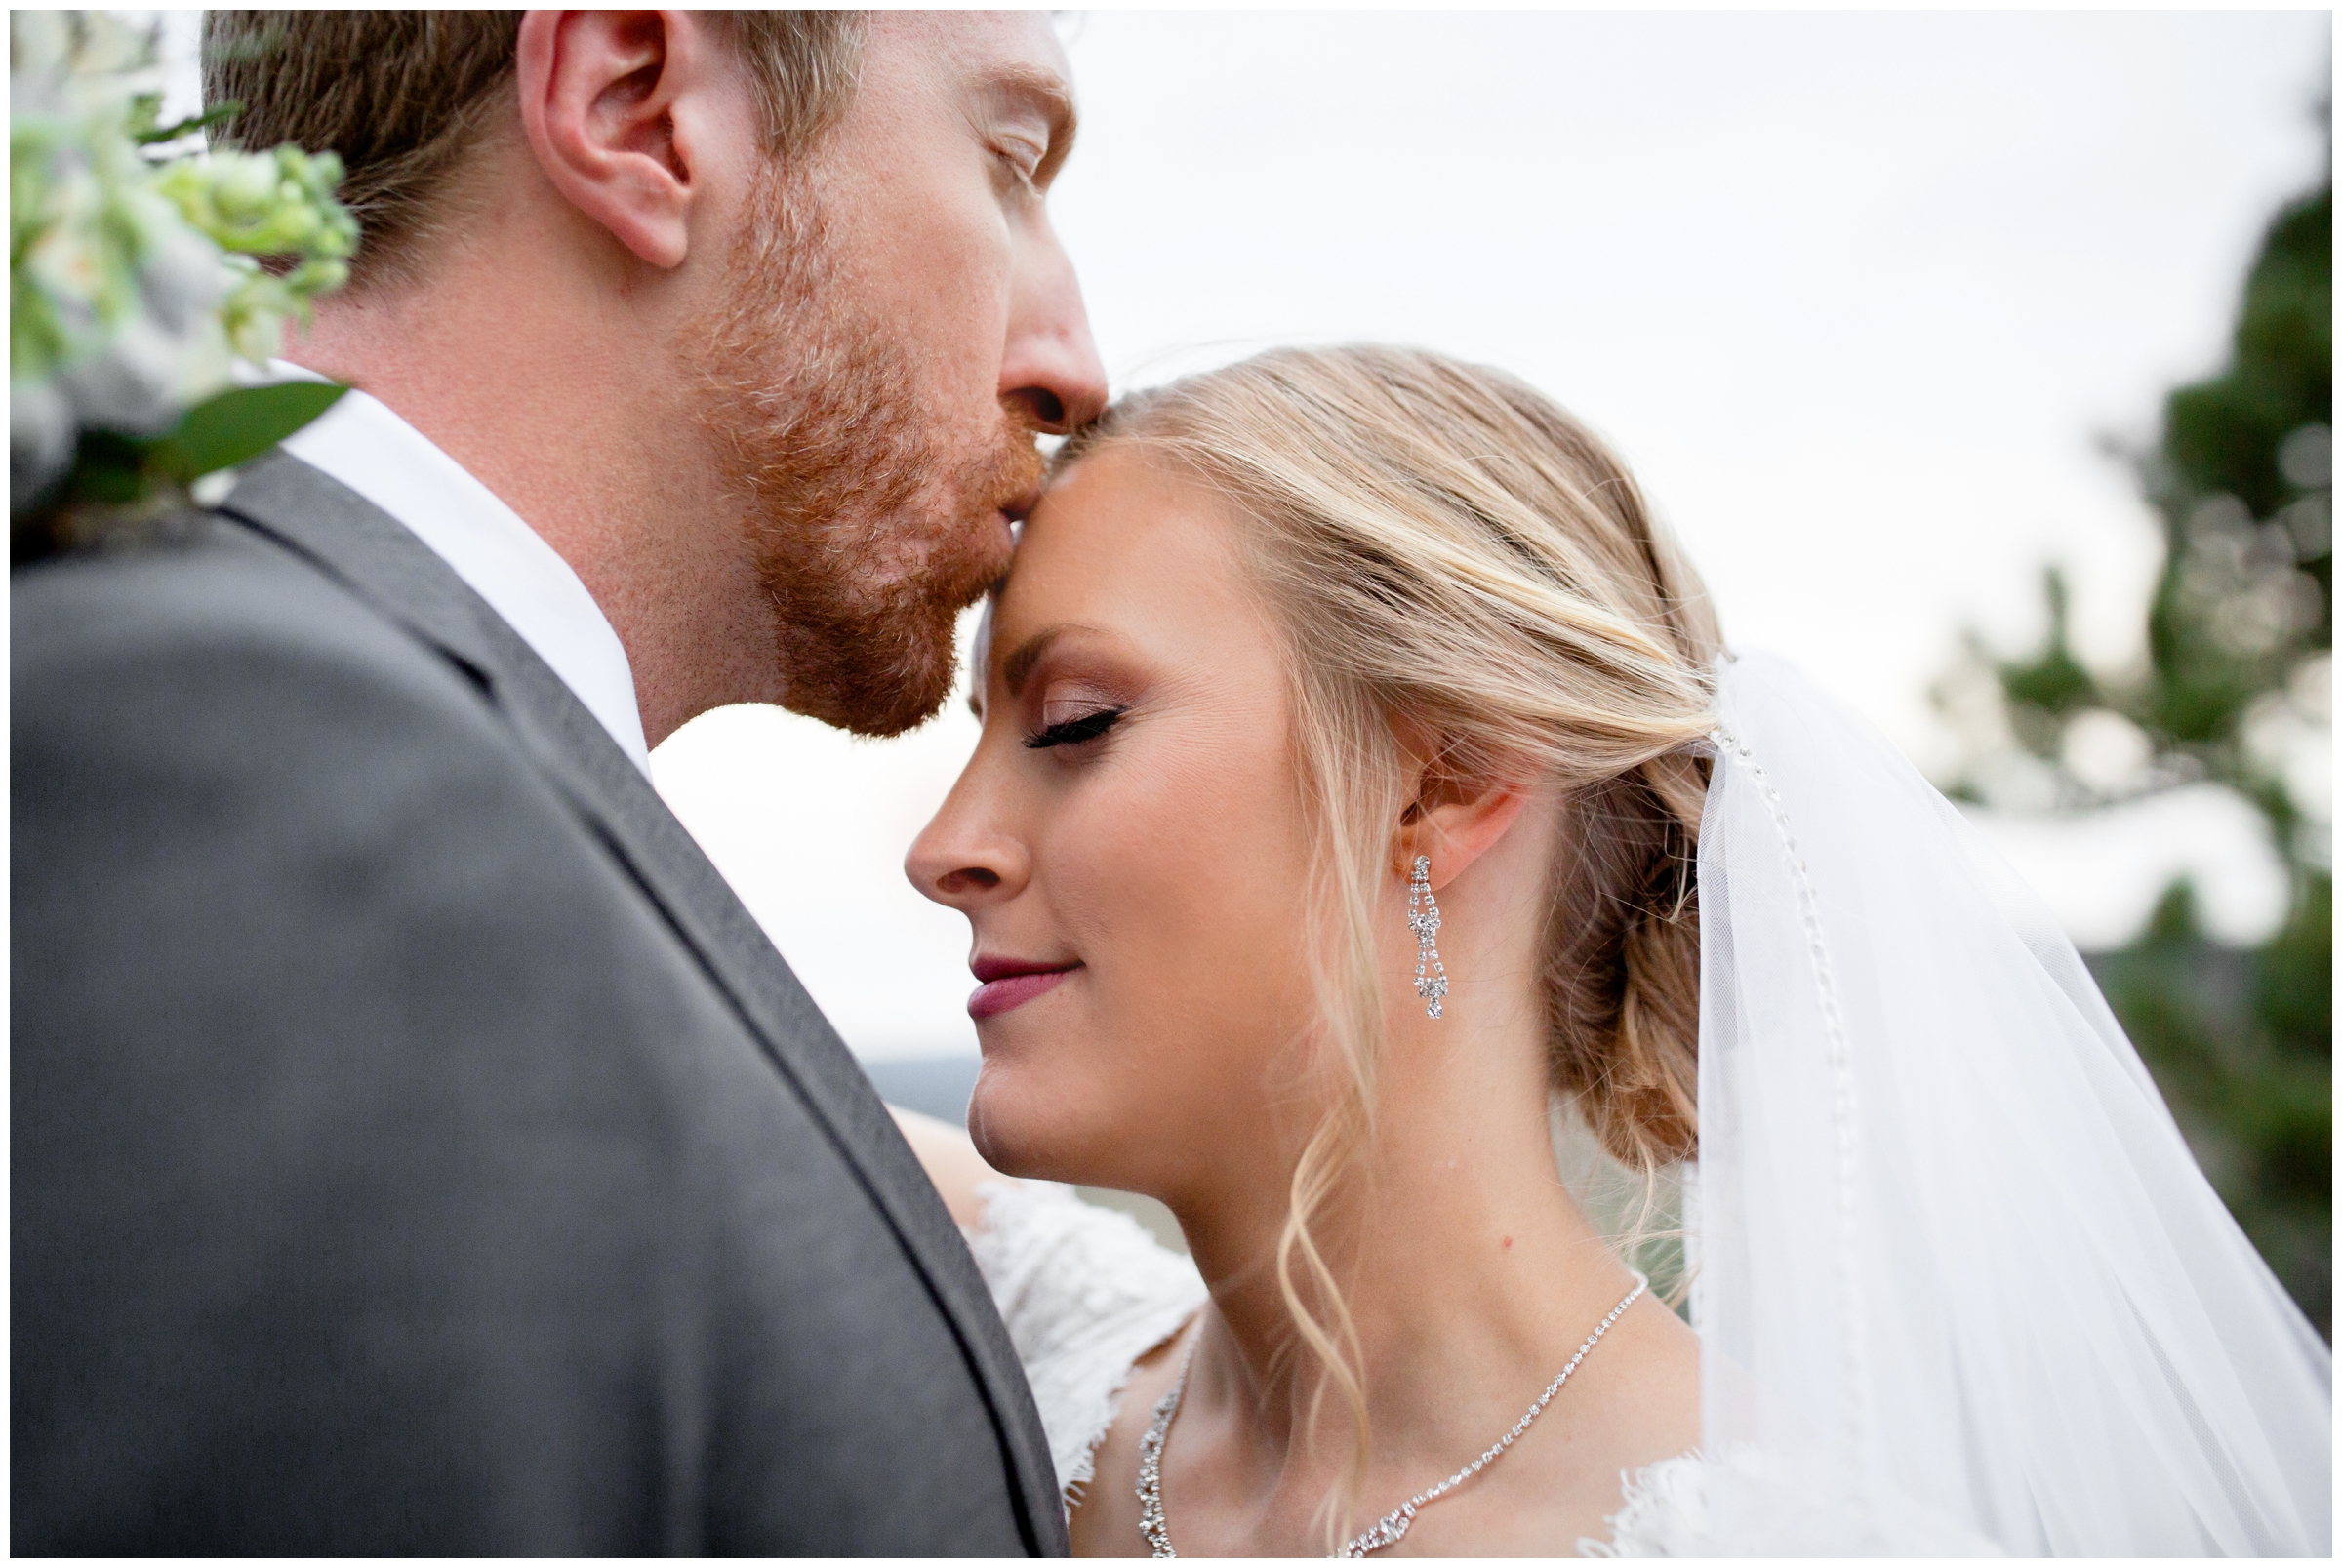 groom kissing bride's forehead during wedding at Lionscrest Manor by Lyons Colorado photographer Plum Pretty Photography